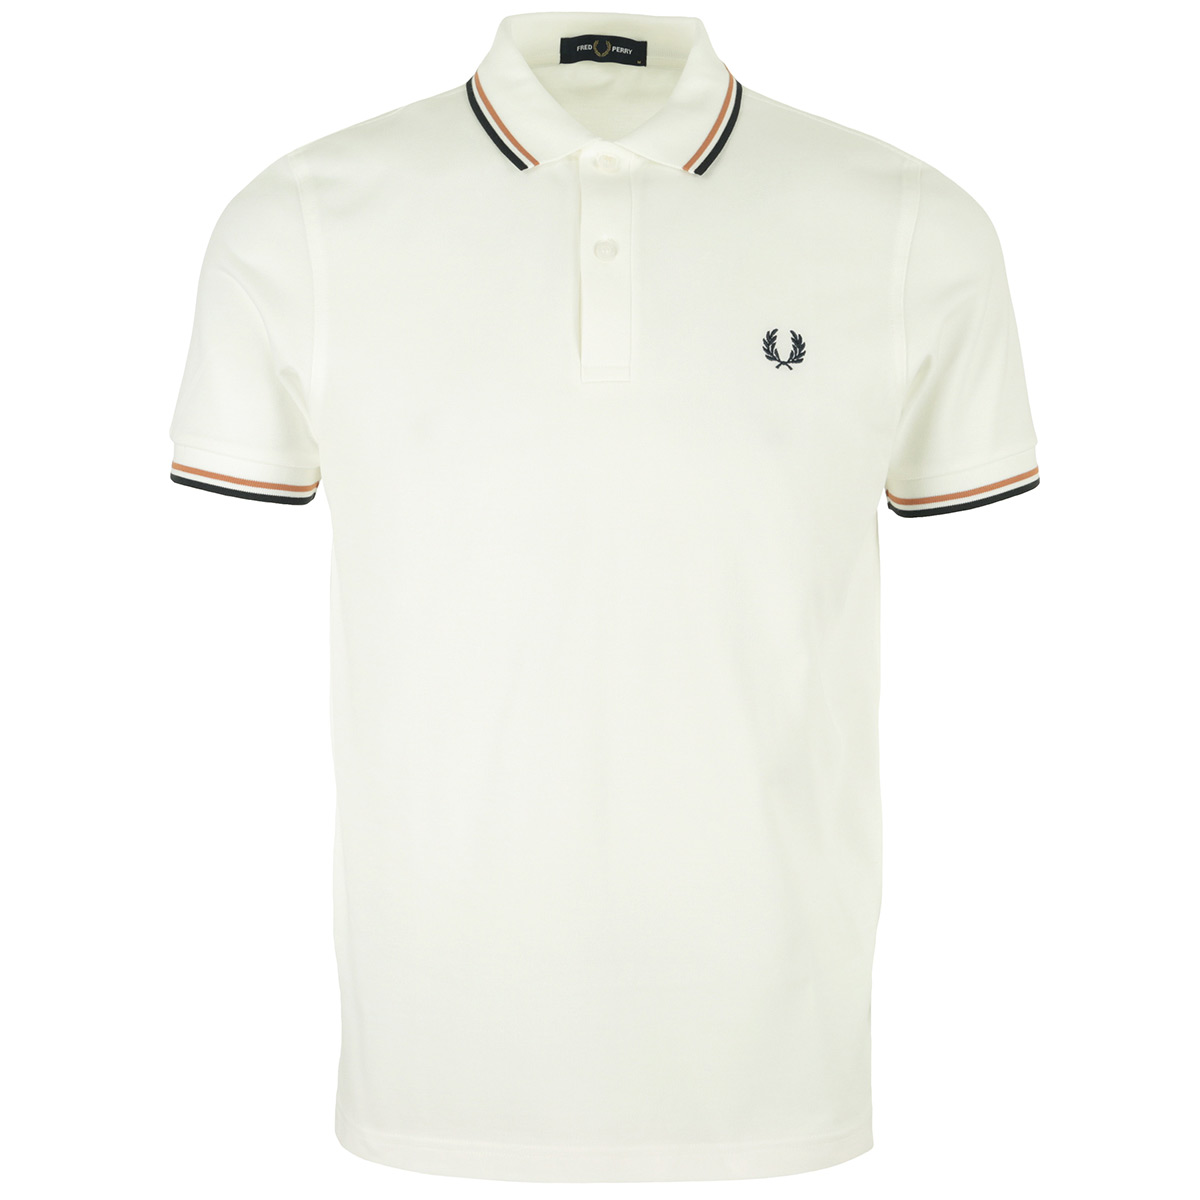 Fred Perry "Twin Tipped Shirt"